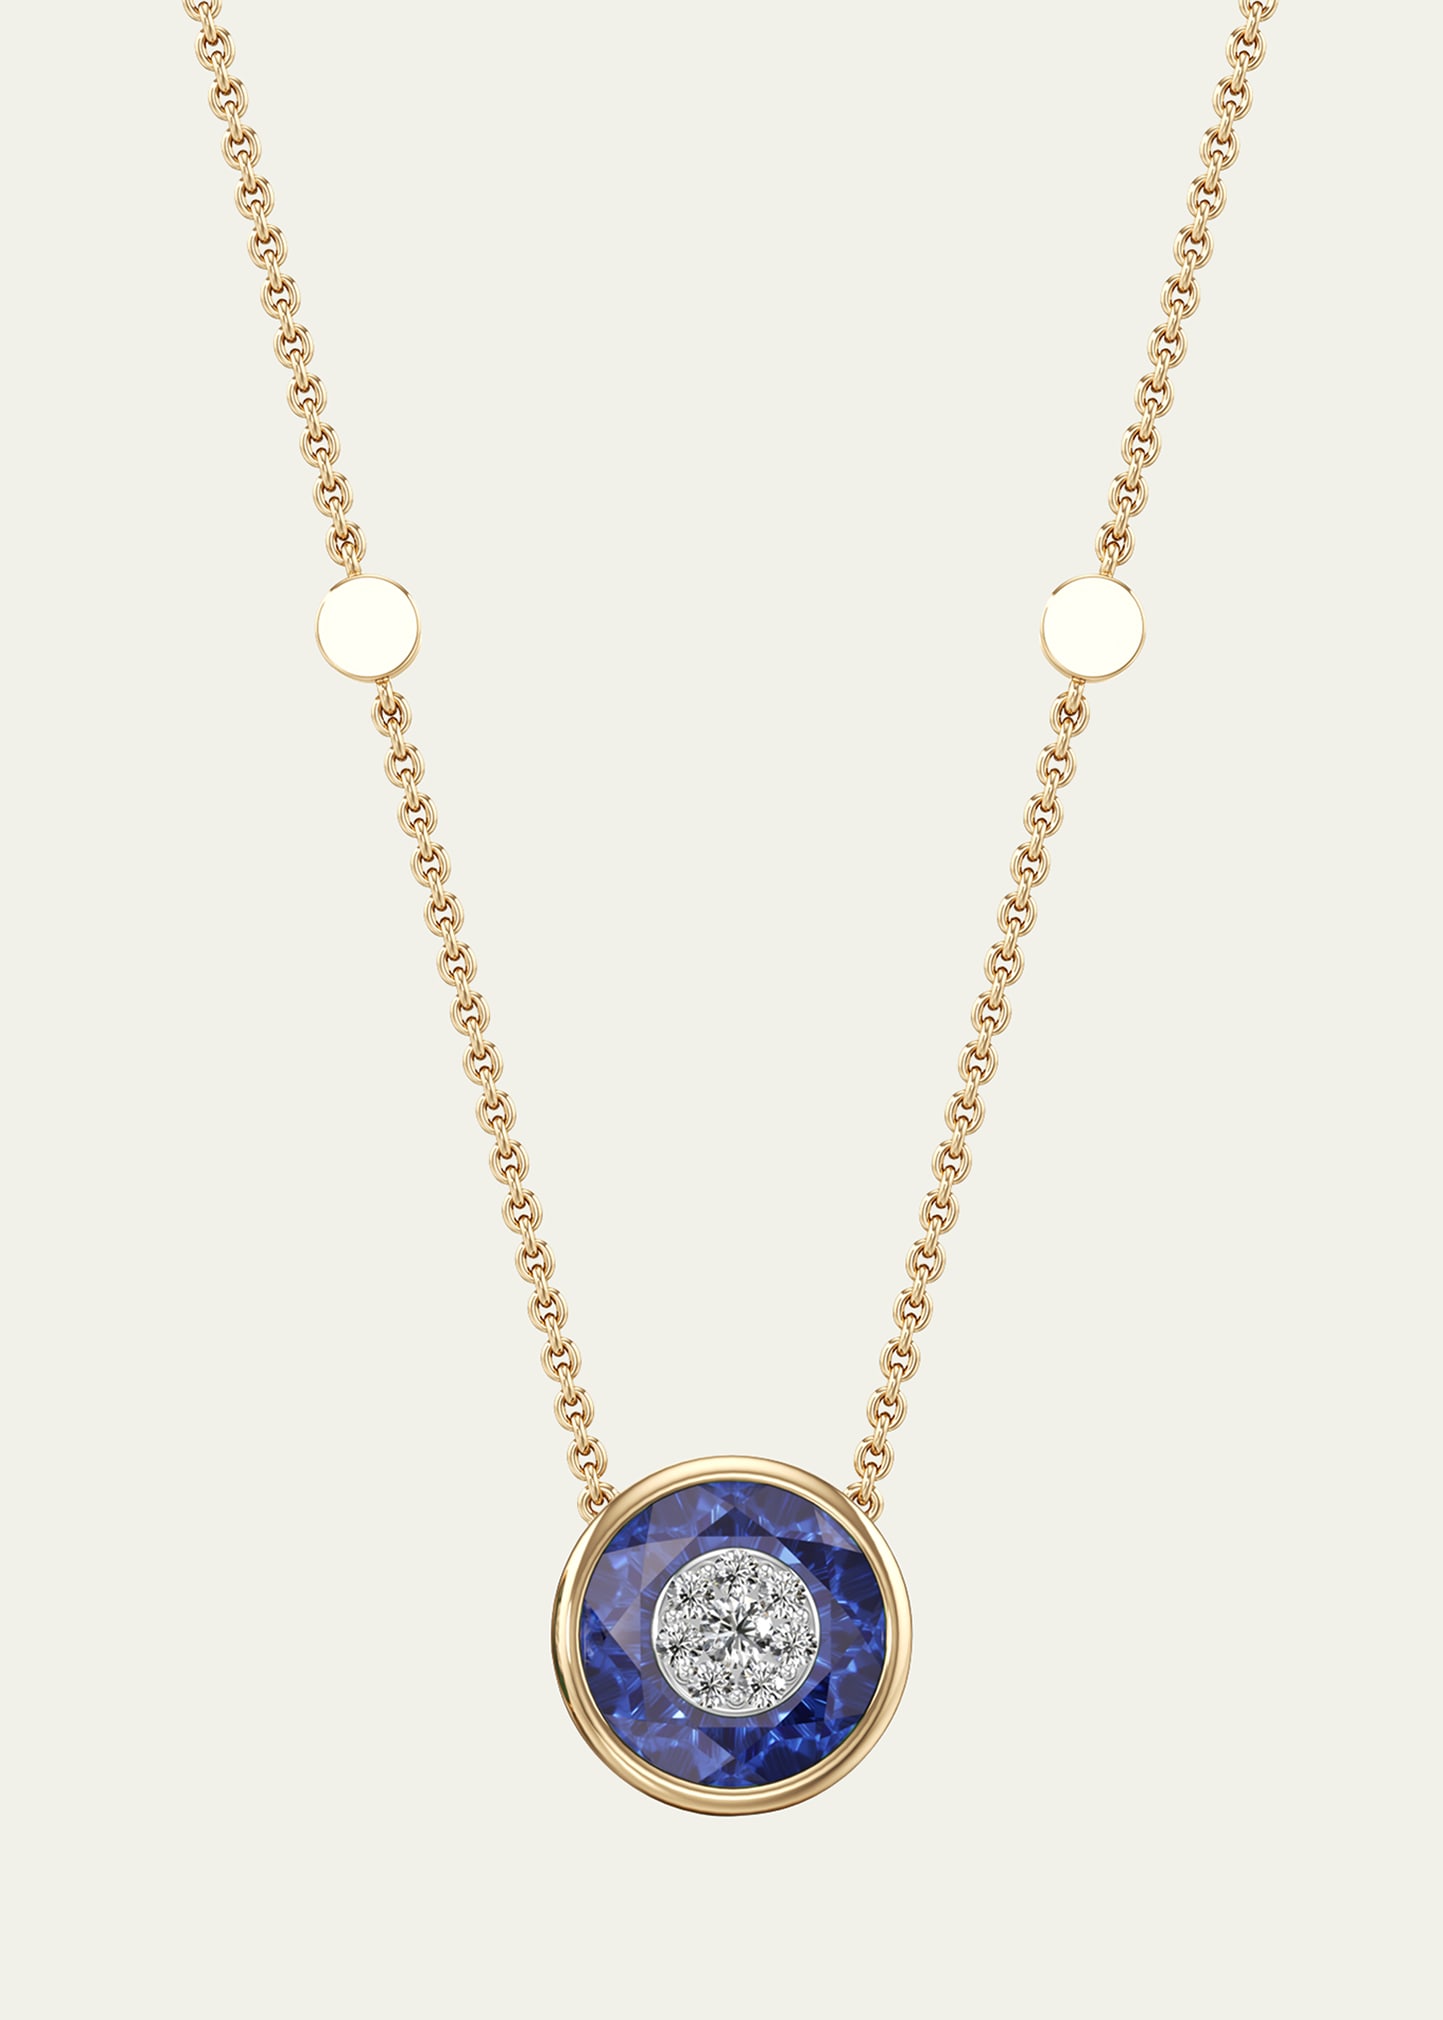 Bhansali One Collection 10mm Pendant Necklace with Yellow Gold Bezel, Sapphire